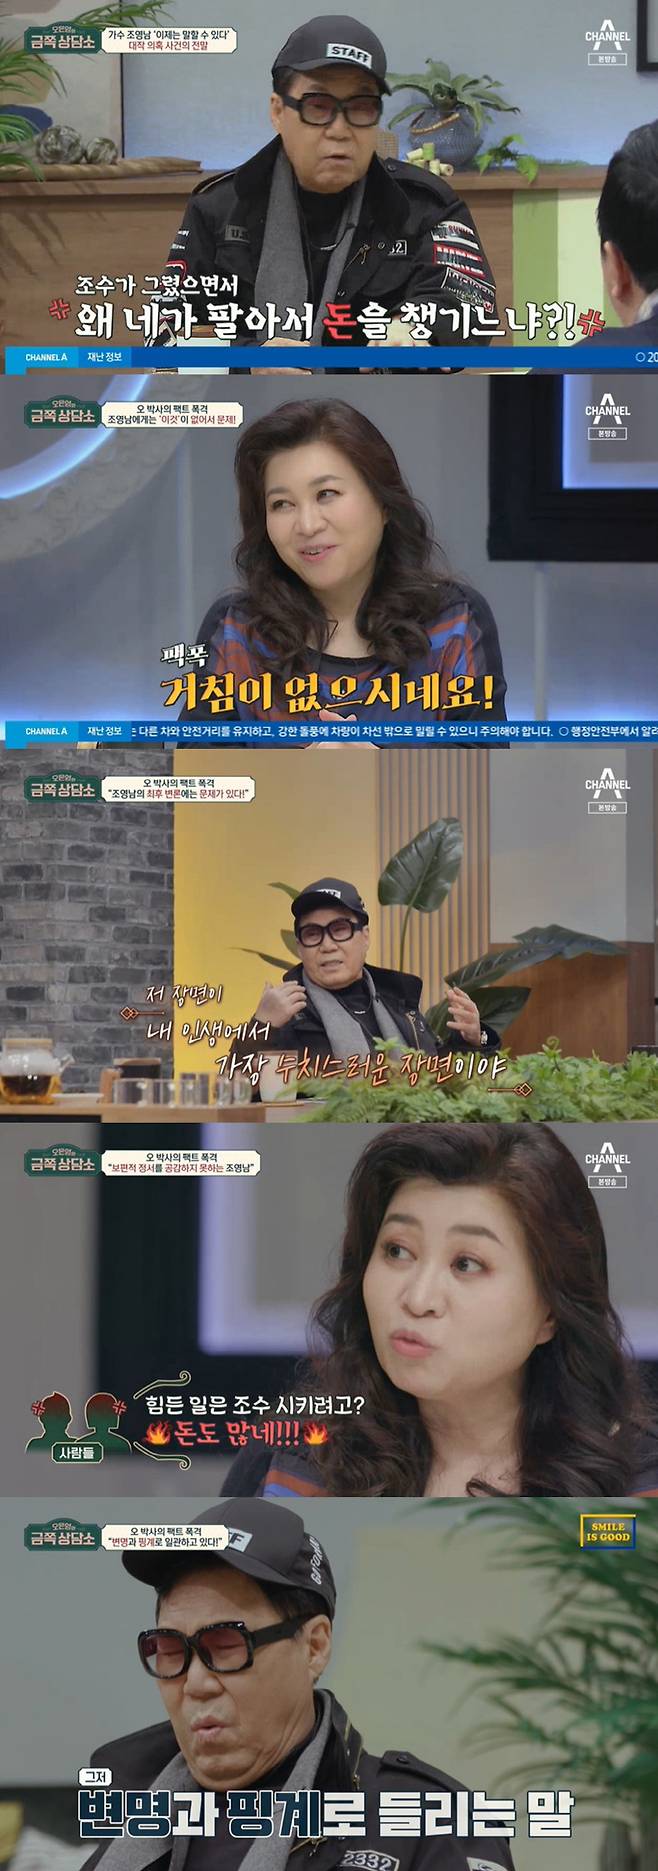 Gold Counseling Center Cho Young-nam took a moment of humor and confessed his true heart.On the 4th, Channel A entertainment program Oh Eun-youngs Gold Counseling Center appeared as a guest of 78 years old oldest customer Cho Young-nam.Cho Young-nam told Park Na-rae, who reads the results of the preliminary test, I have not received the trial for five years.When the judge read the ruling, he said, But I gave two years of probation for 10 months in prison.This was not the only controversy. The pro-Japanese controversy was raised by other remarks. Cho Young-nam said, This is the worst guy,I havent done anything in two years since, he said, unjust.As for the controversy over the final acquittal of the painting, There is a work that cut the painting and made it like a collage.When I first cut off the real fire, people liked it, so I told my assistant to draw it the same.It is a picture with my autograph, but it is a little different from One, and the prosecution said it was a masterpiece. Business painters use all the assistants.I said that I could use an assistant in the Supreme Court One. You are not cowardly and fearless; you are not avoiding questions; you are not filtered, said Oh Eun Young, who heard Chos speech.Oh Eun Young said, I think there are three controversies in common: I understand the teachers intention, but the speech itself is a controversial speech.I will explain this in detail, he said, looking at and analyzing the public defense video of the Supreme Court One.Cho Young-nam, who watched the video together, said, That scene is the most shameful scene of my life. I did not want to cry, but I have accumulated for five years.Oh Eun Young recounted the publics misconceptions, saying, The public thinks of some universal and general standards and does not seem to consider that part.Oh Eun Young said, I do not have anything wrong, but I think I should think that subtle nuances can be bad for the public. Oh Eun Youngs sharp analysis did not shut his mouth.I had to refine the horse and that was the best I could do, said Cho Young-nam, who was thinking for a long time. I knew this was not a sin.But people already believed I was a fraud. I was embarrassed to talk about something. I could not live as a fraud forever. Stand in front of four Supreme Court justices.I was floating in front of Mr. Oh, and it was really bloody. Oh Eun Young said, I would have heard Feelings who were wrong in life. Cho Young-nam said, How could you bear it?My paintings have been promoted for five tough years, he continued another breathtaking statement.Oh Eun Young said, The teacher is a person with a lot of talent to say, so when he talks about a story that is openly repercussive, he has his own humor and analogy.But some people are not humoured, he said Careful.After hearing this, Cho Young-nam asked Oh Eun Young for an alternative to elegant revenge remarks and Oh Eun Young asked for his sincerity about the remarks.I was thinking, Youve become better than me, said Cho Young-nam, and Oh Eun Young said, You can say that then. I think its better not to write humor or analogy.After hearing the story for a long time, Jeong Hyeong-don also got lucky with Careful: I dont think you have any consideration for the other side.The teacher seems to be a person with wit, but the target person is not protected. Oh Eun Young presented Cho Young-nam with a new conversation method: a reverse pyramid conversation method that first talked about the most important conclusion.Oh Eun Young asked Cho Young-nam about the most regrettable thing he had lived in, and Cho Young-nam, who hesitated for a long time, said, The children were kicked out of the house when they were young.Cho said, I broke up with someone who lived with me, but why did not I know that there were children at that time? It is regrettable for the rest of my life and remains a guilt.But Cho Yeong-nam has never told his children this sorry heart.Cho Young-nam said, I think that I will not think of myself as a parent, so I do not even think about saying that or even listening.Oh Eun Young said, Parents are just parents. Good parents and wrong parents, but parents are just parents.If you have such a mind, it will help to express it in some form. Cho Young-nam said, I do not know that even if I do not say that, I think they know everything.I believe that I will understand everything, but I have never talked about it. Oh Eun Young said, Kid is different from me from birth.So if you dont tell me, I dont know, he said.